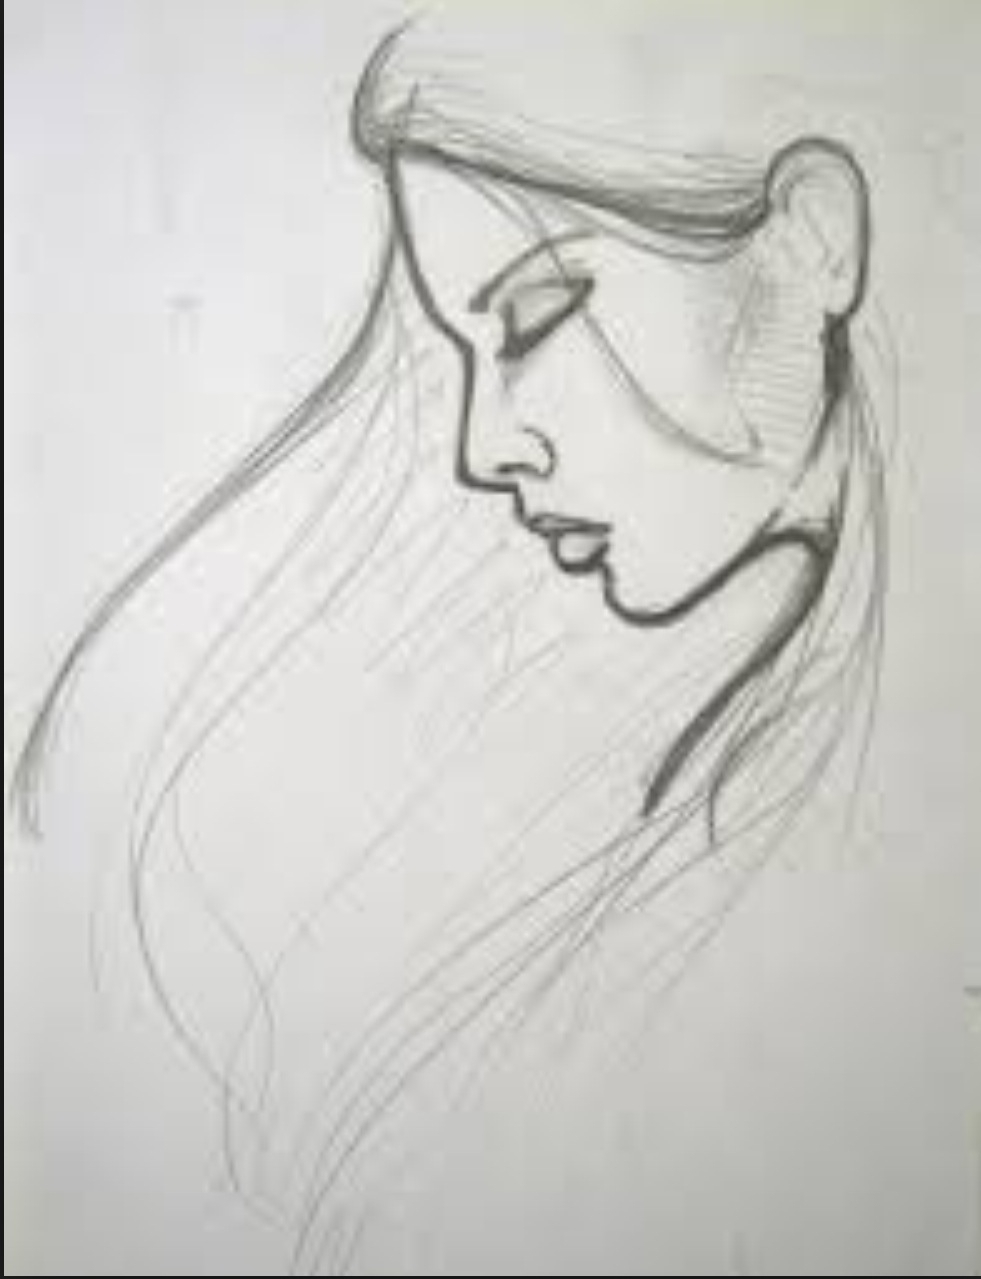 Easy Sketching Ideas For Beginners at PaintingValley.com | Explore